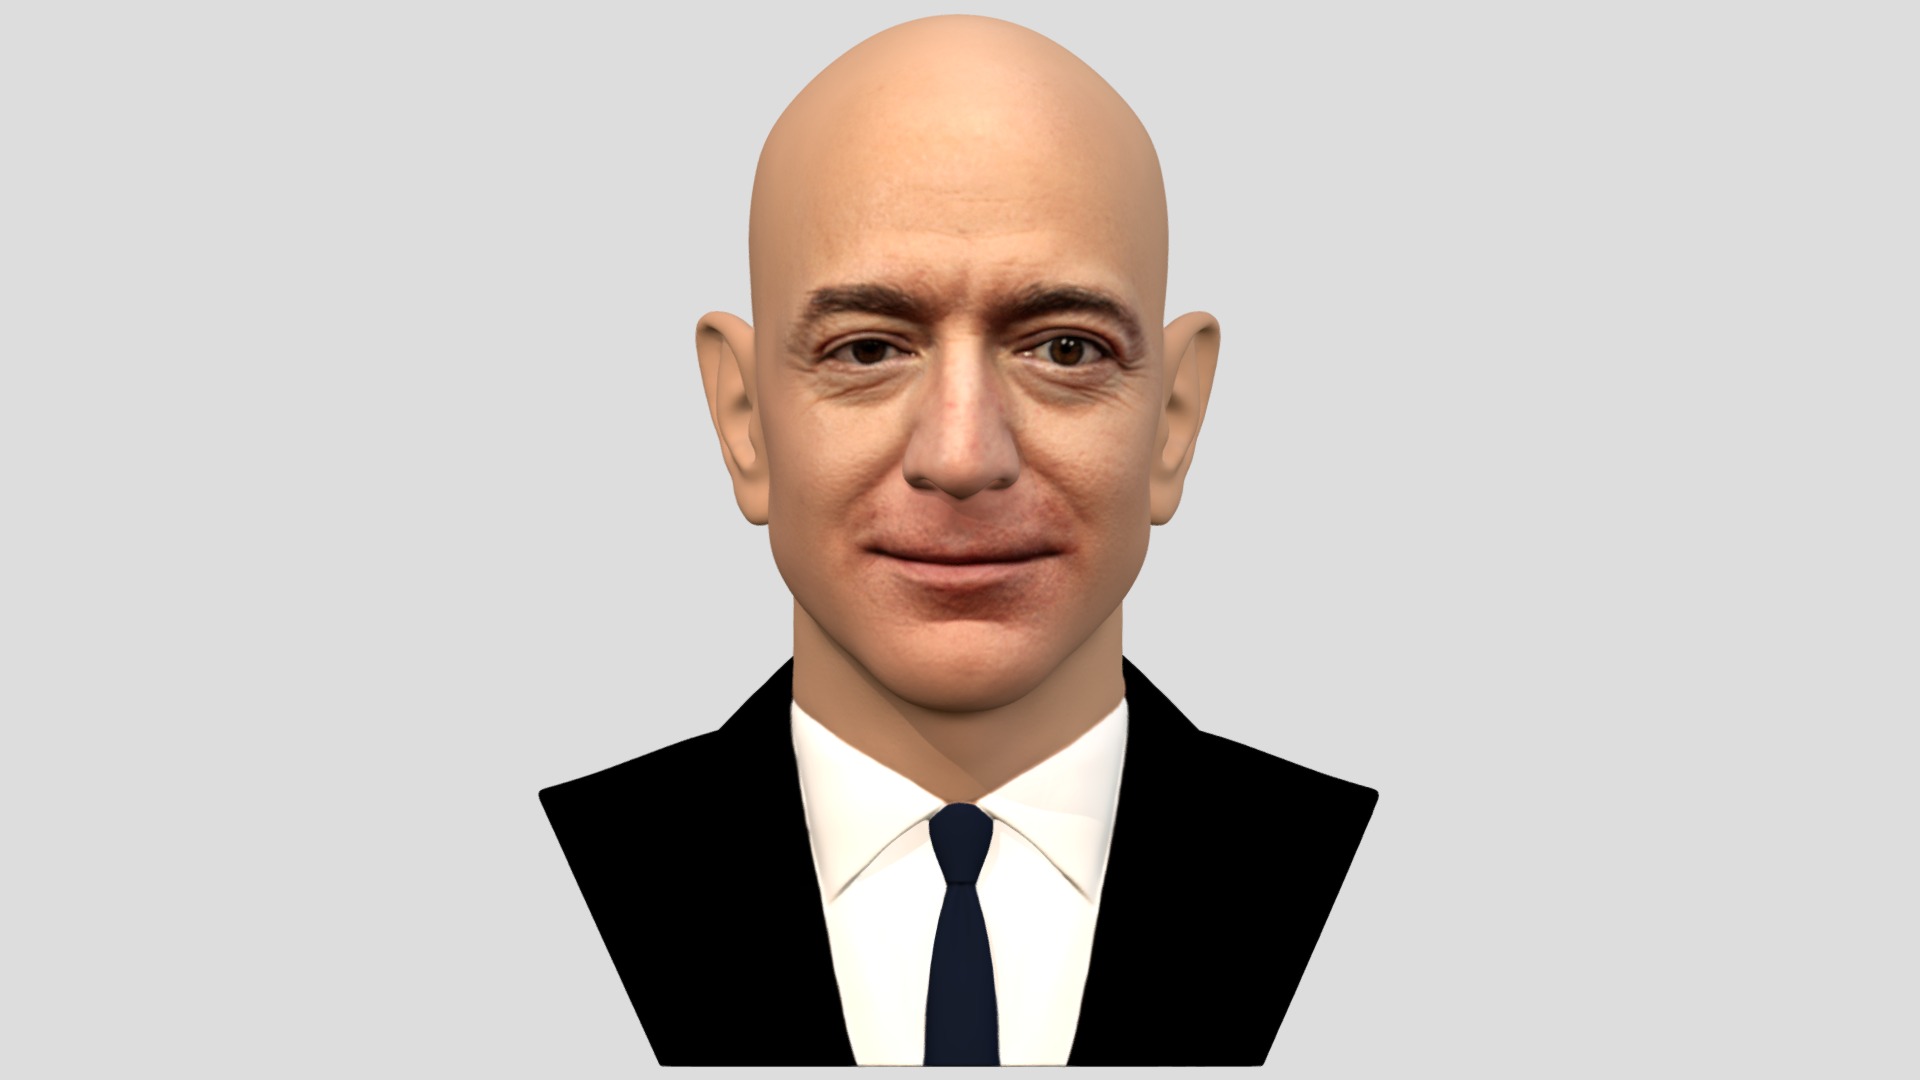 3D model Jeff Bezos bust for full color 3D printing - This is a 3D model of the Jeff Bezos bust for full color 3D printing. The 3D model is about a man in a suit.